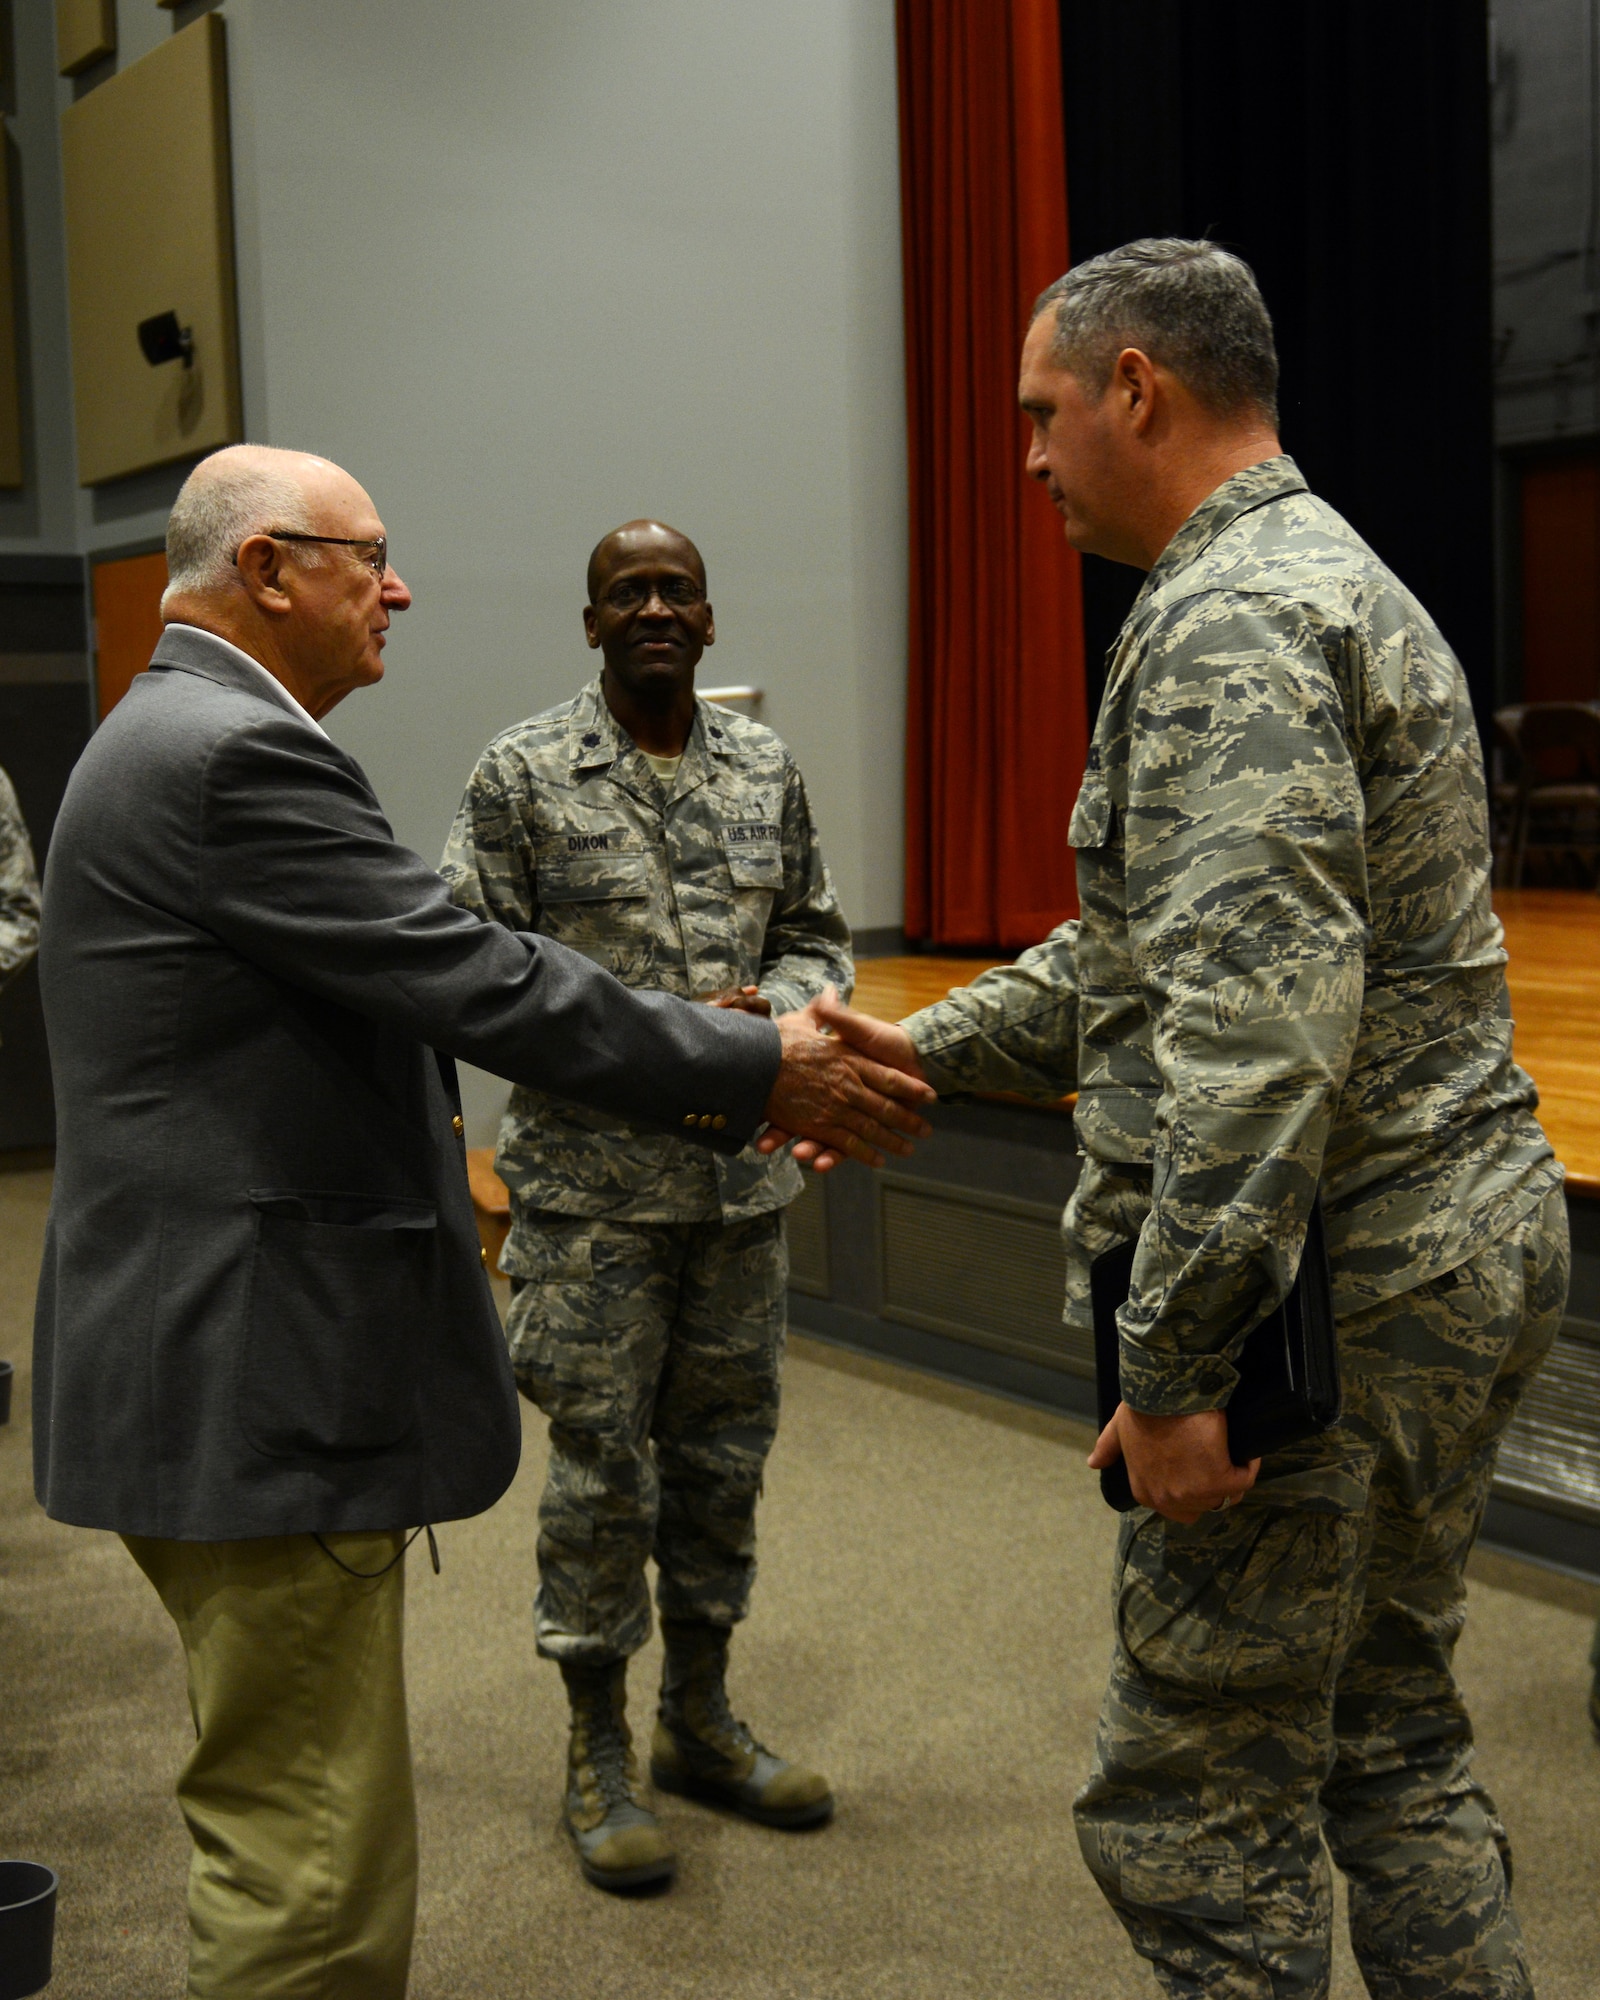 U.S. Air Force Col. Steven Beasley, 7th Bomb Wing vice commander, greets Rev. Bill Libby, McMurry assistant professor of religion, Nov. 24, 2014, at Dyess Air Force Base, Texas. Libby, a retired U.S. Army chaplain, spoke about his personal loss and tragedy during a Comprehensive Airman Fitness brief, which highlighted spiritual resiliency. (U.S. Air Force photo by Airman 1st Class Kedesha Pennant/Released)